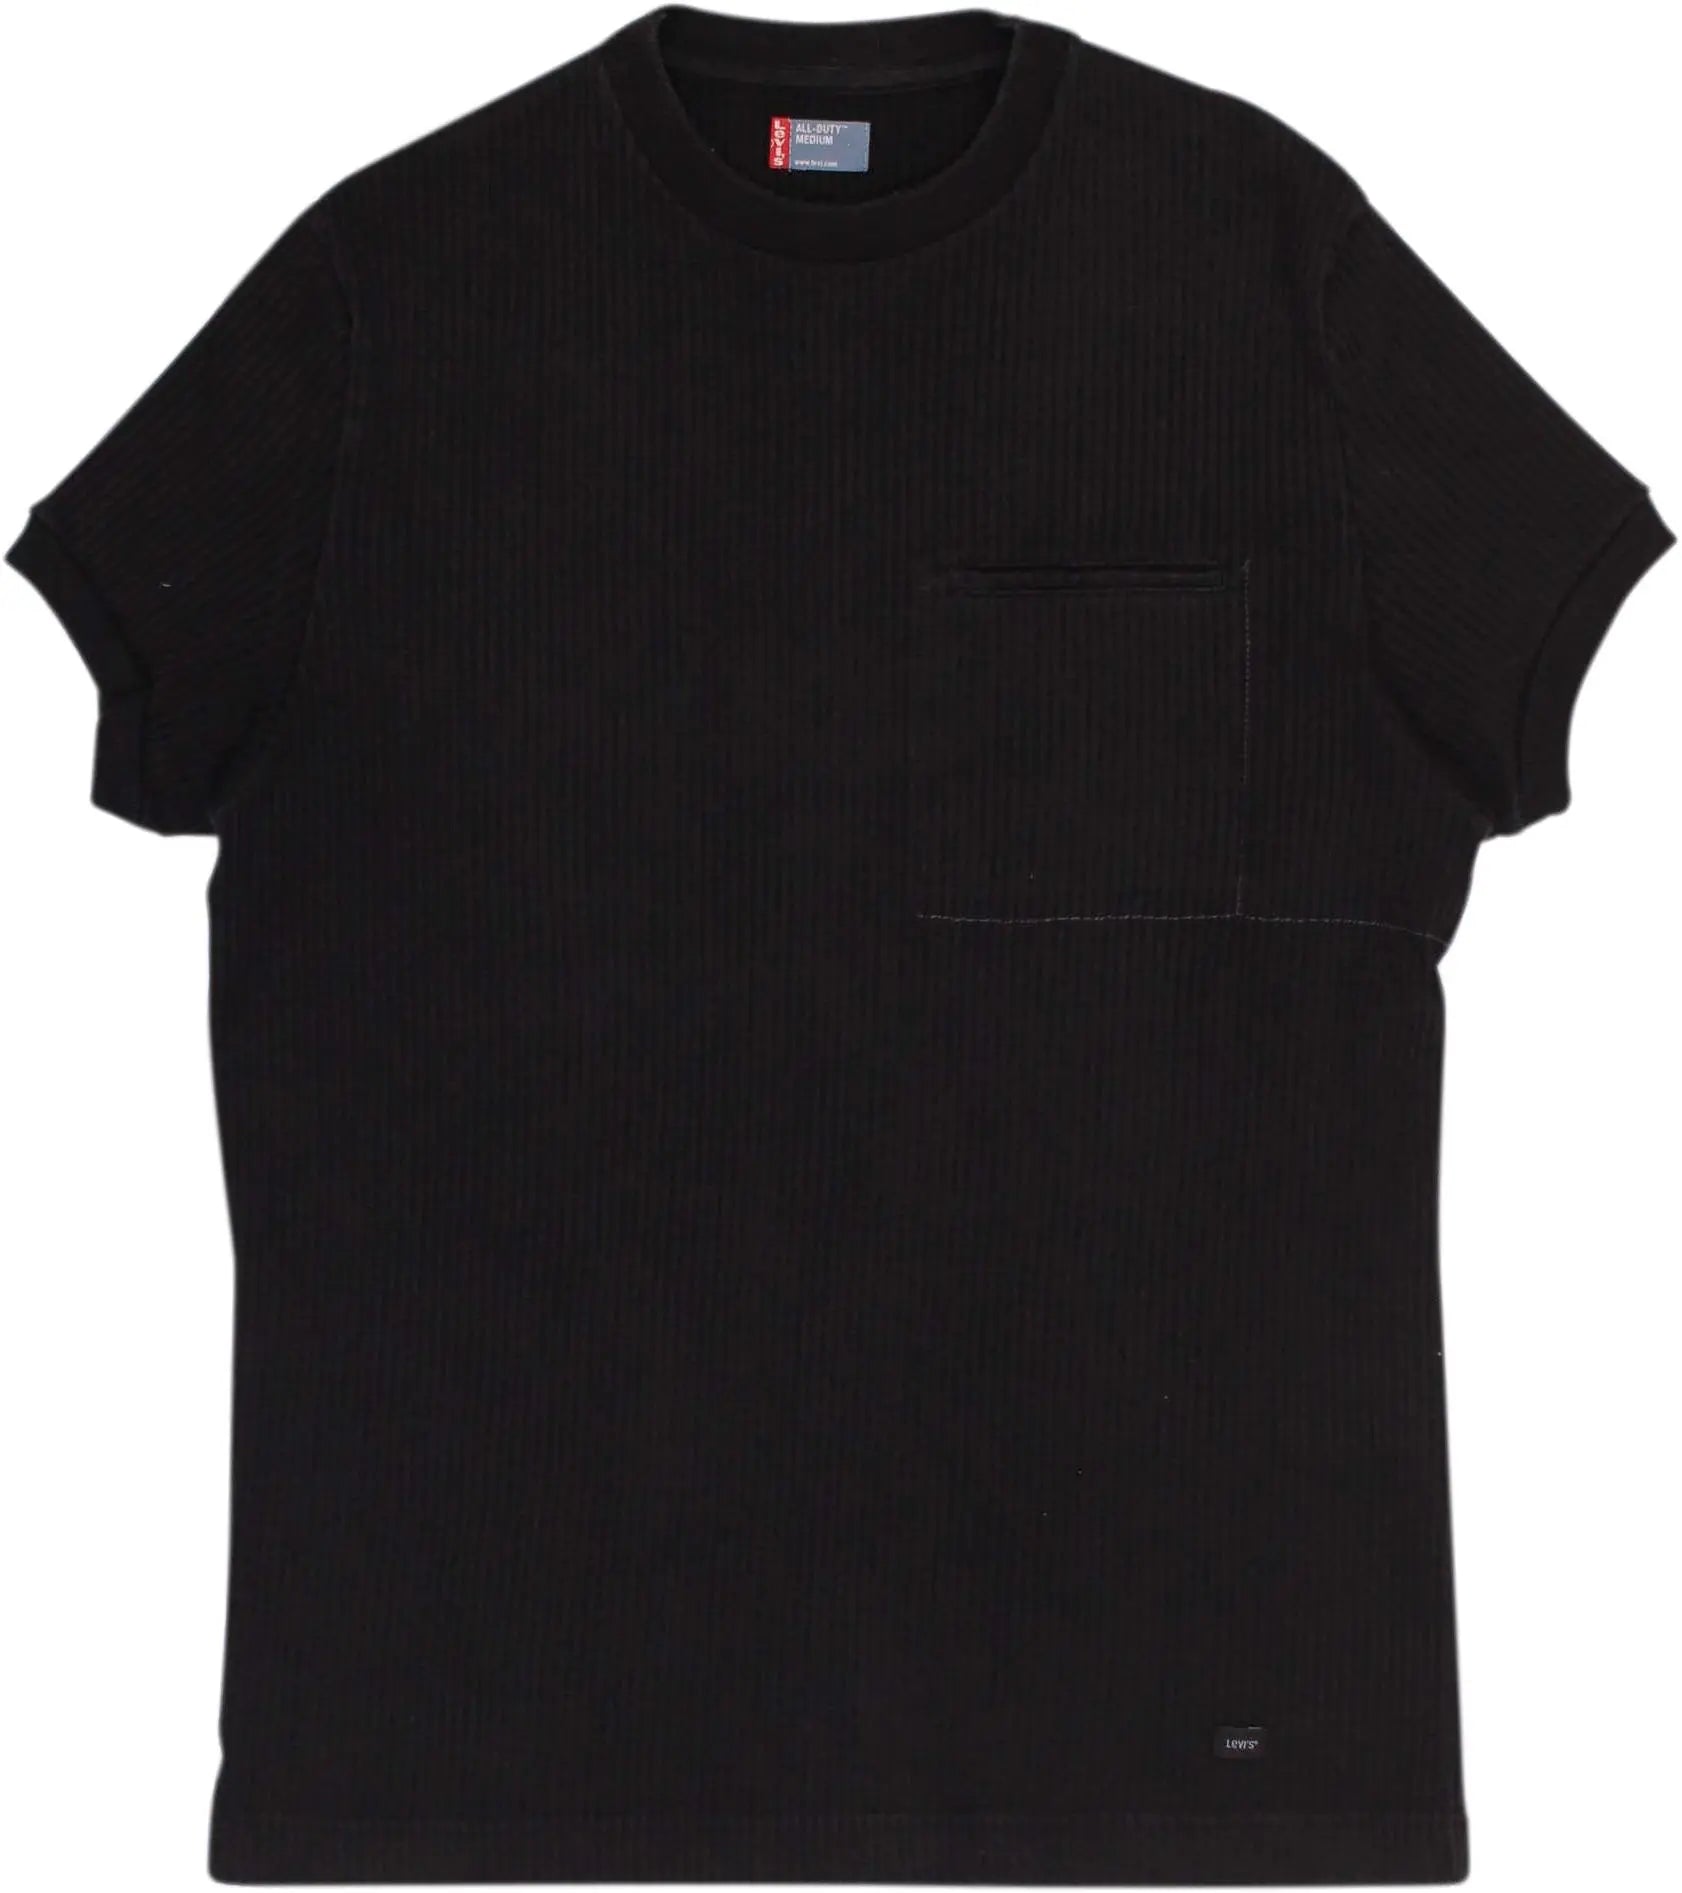 Levi's - Black Ribbed T-shirt by Levi's- ThriftTale.com - Vintage and second handclothing